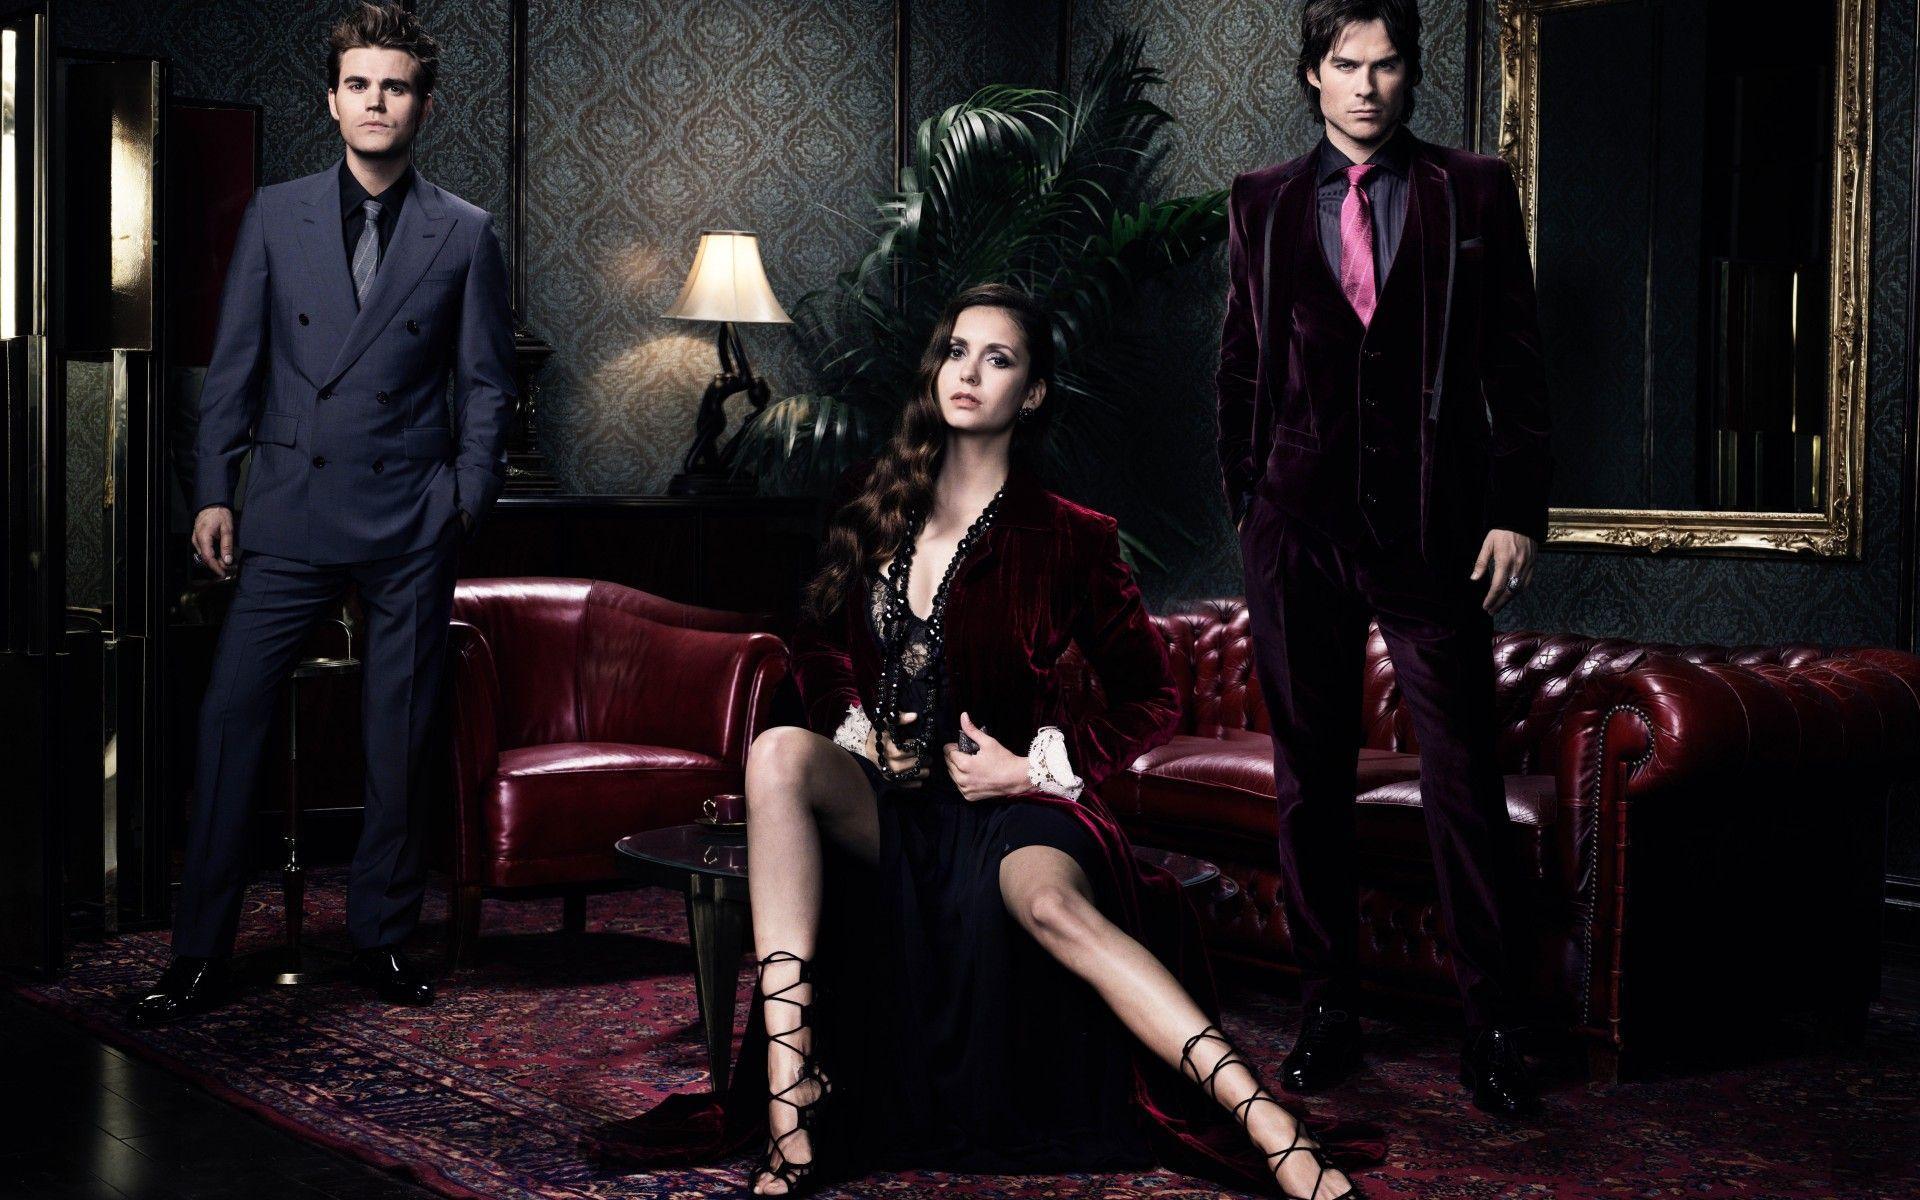 The Vampire Diaries Wallpaper Awesome Image #ol004izy